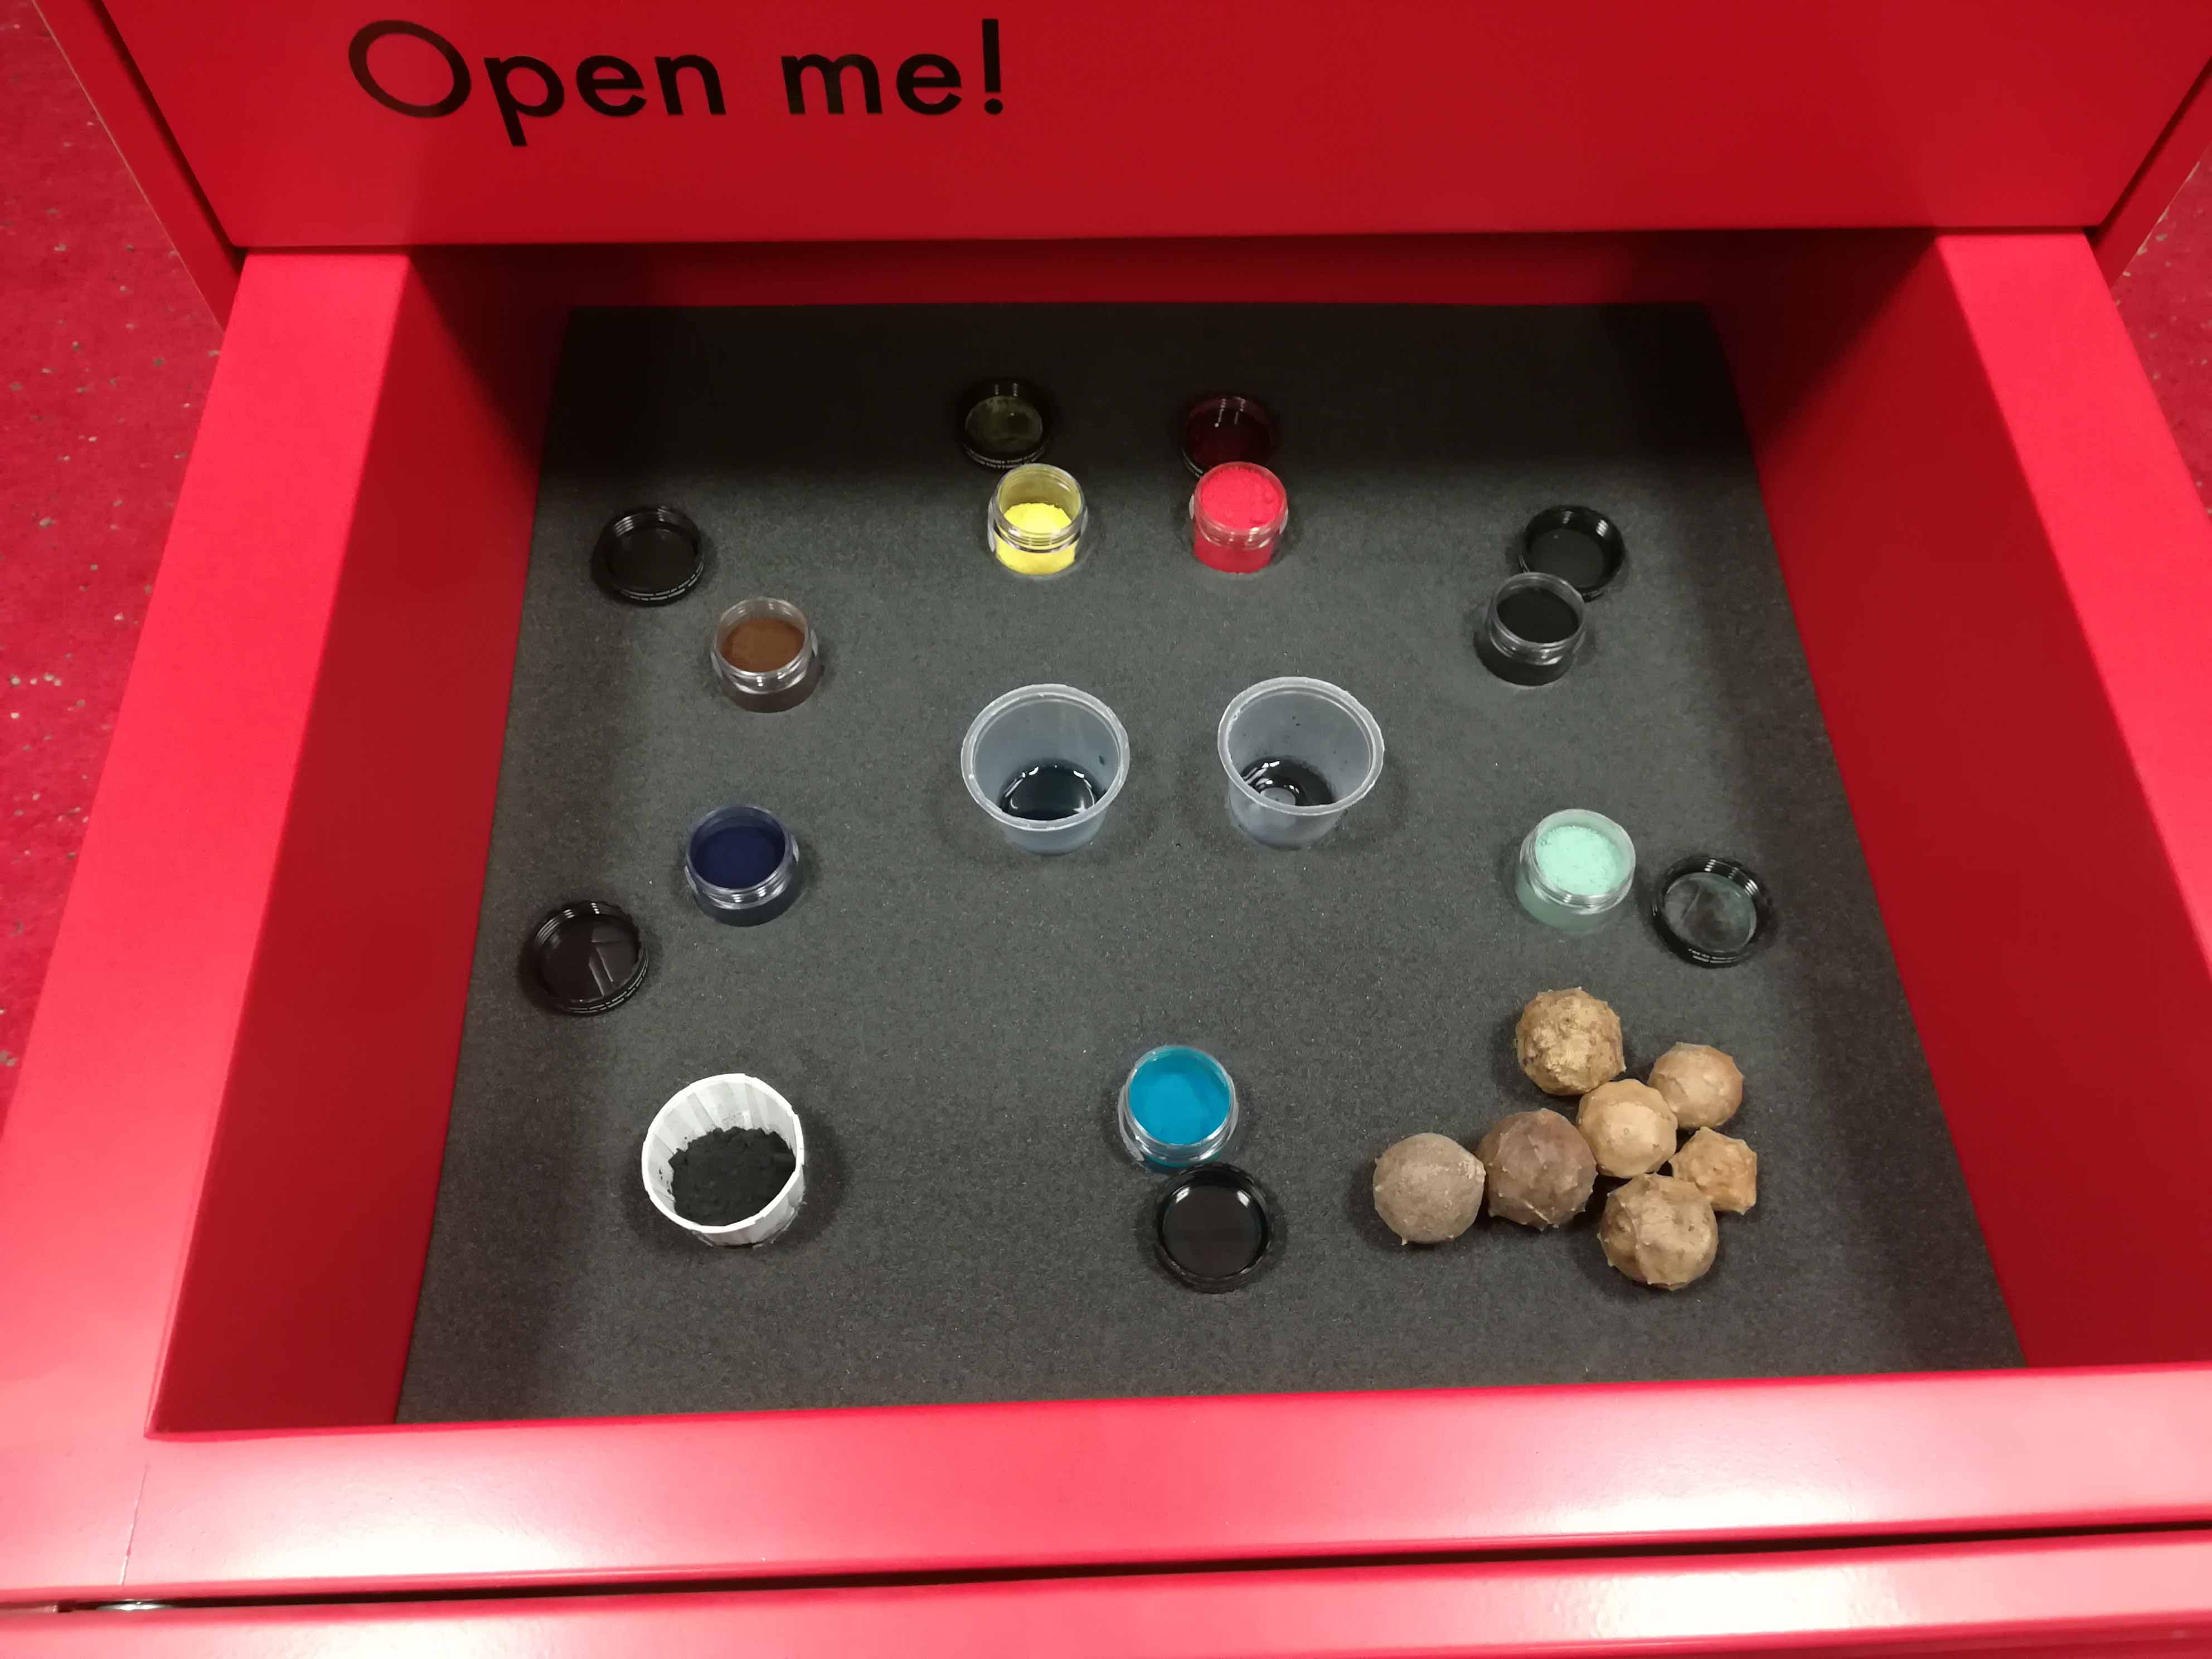 Contents of display case draw